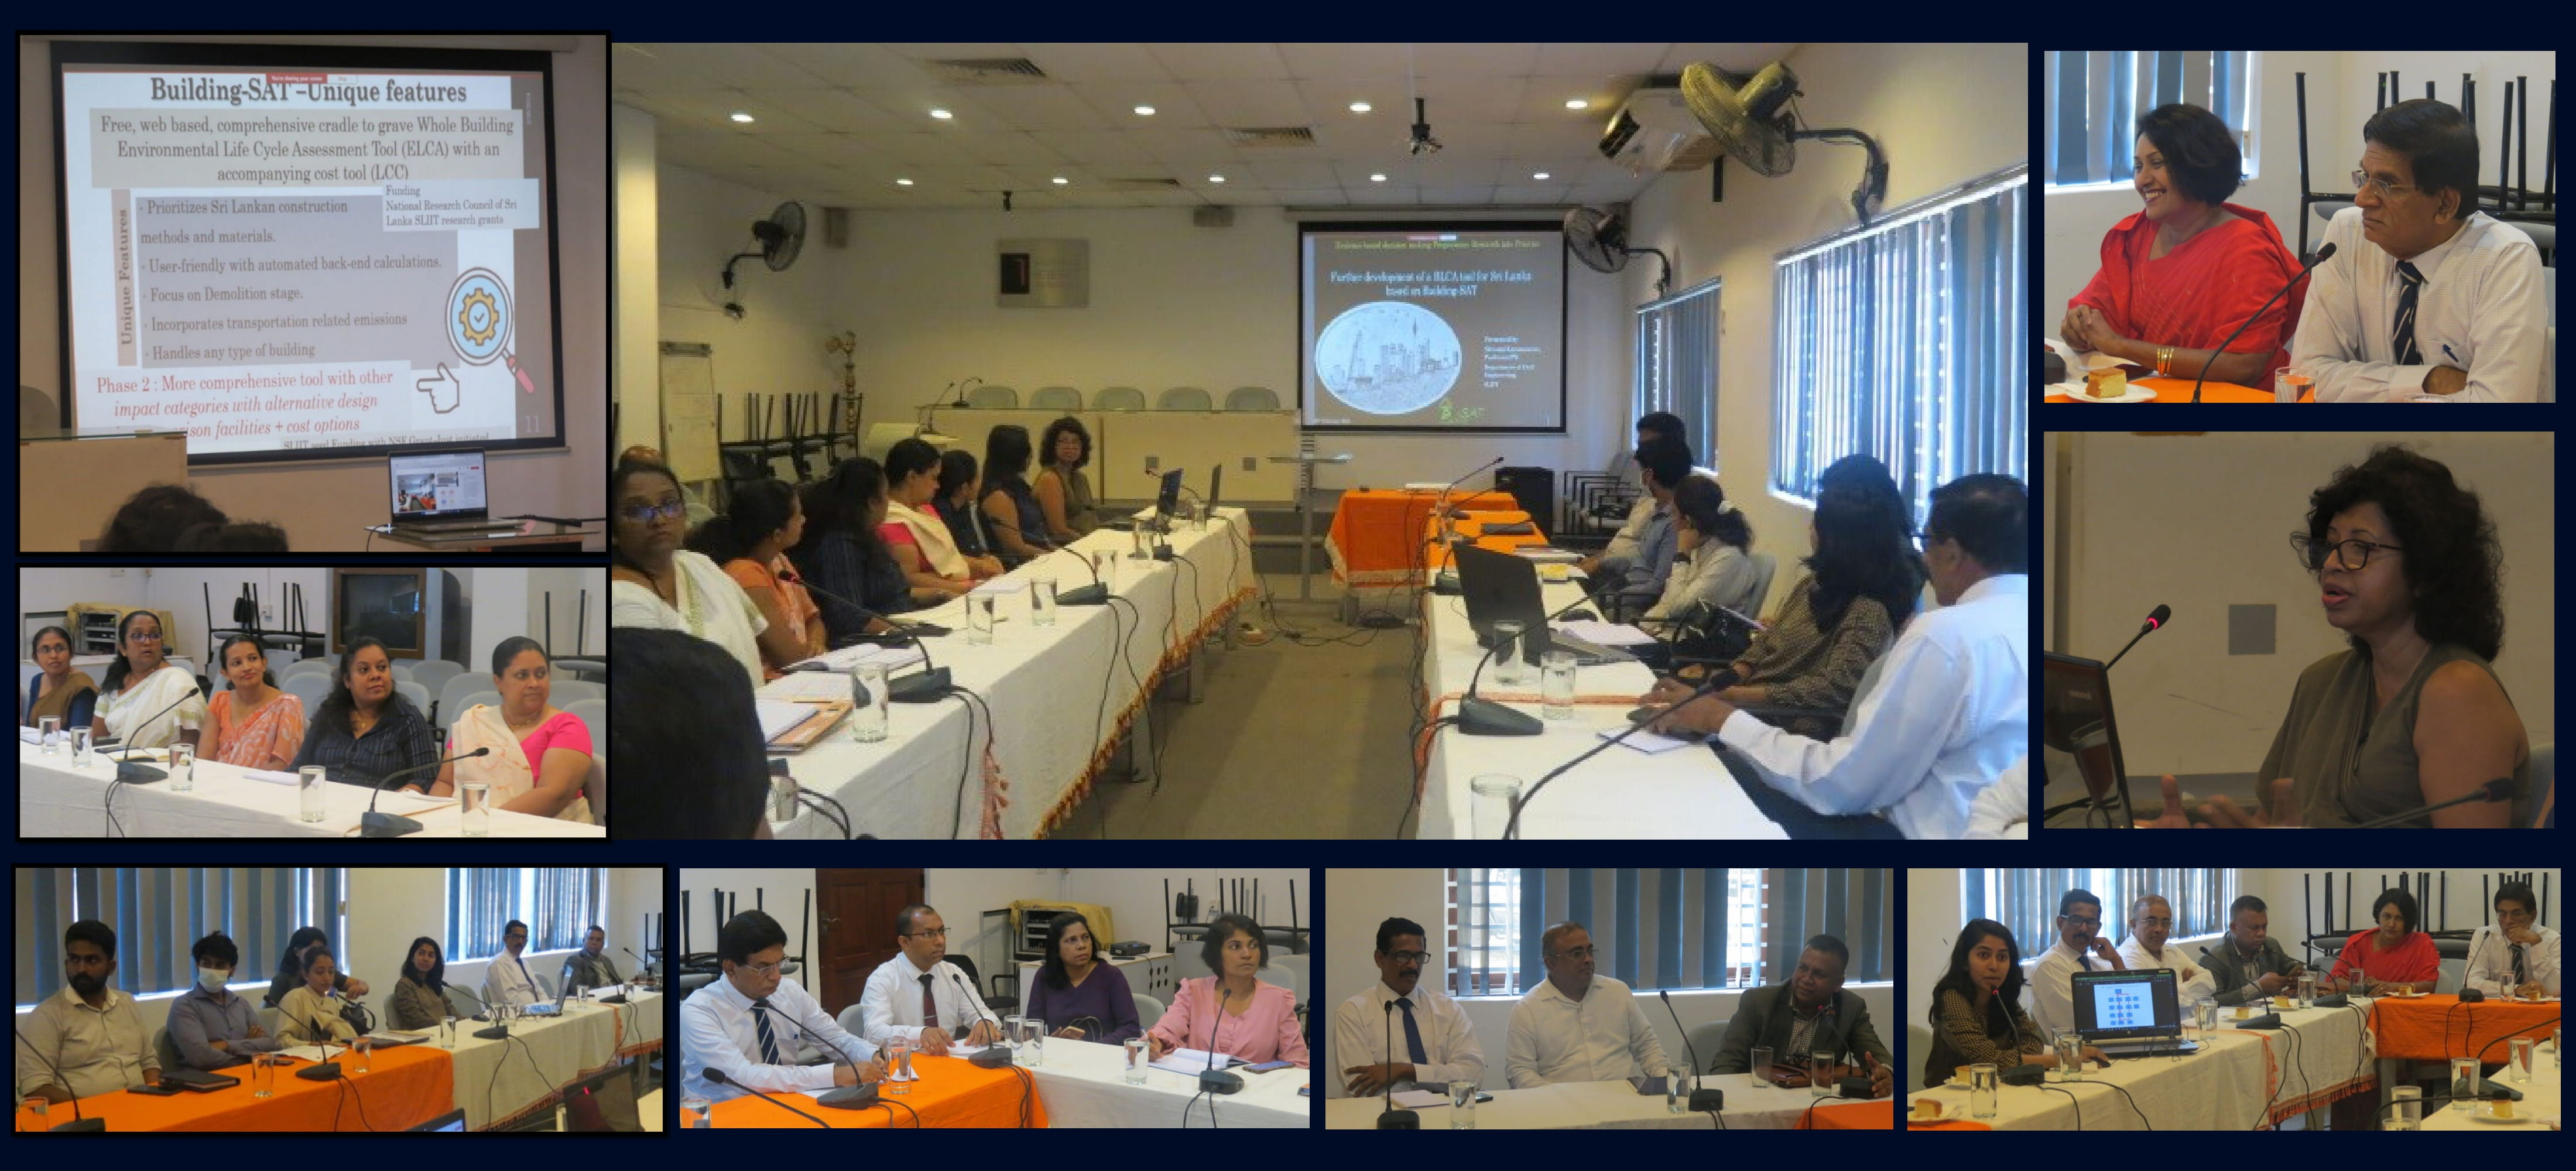 Evidence Based Decision Making in the Country: NSF supports sustainable constructions in Sri Lanka